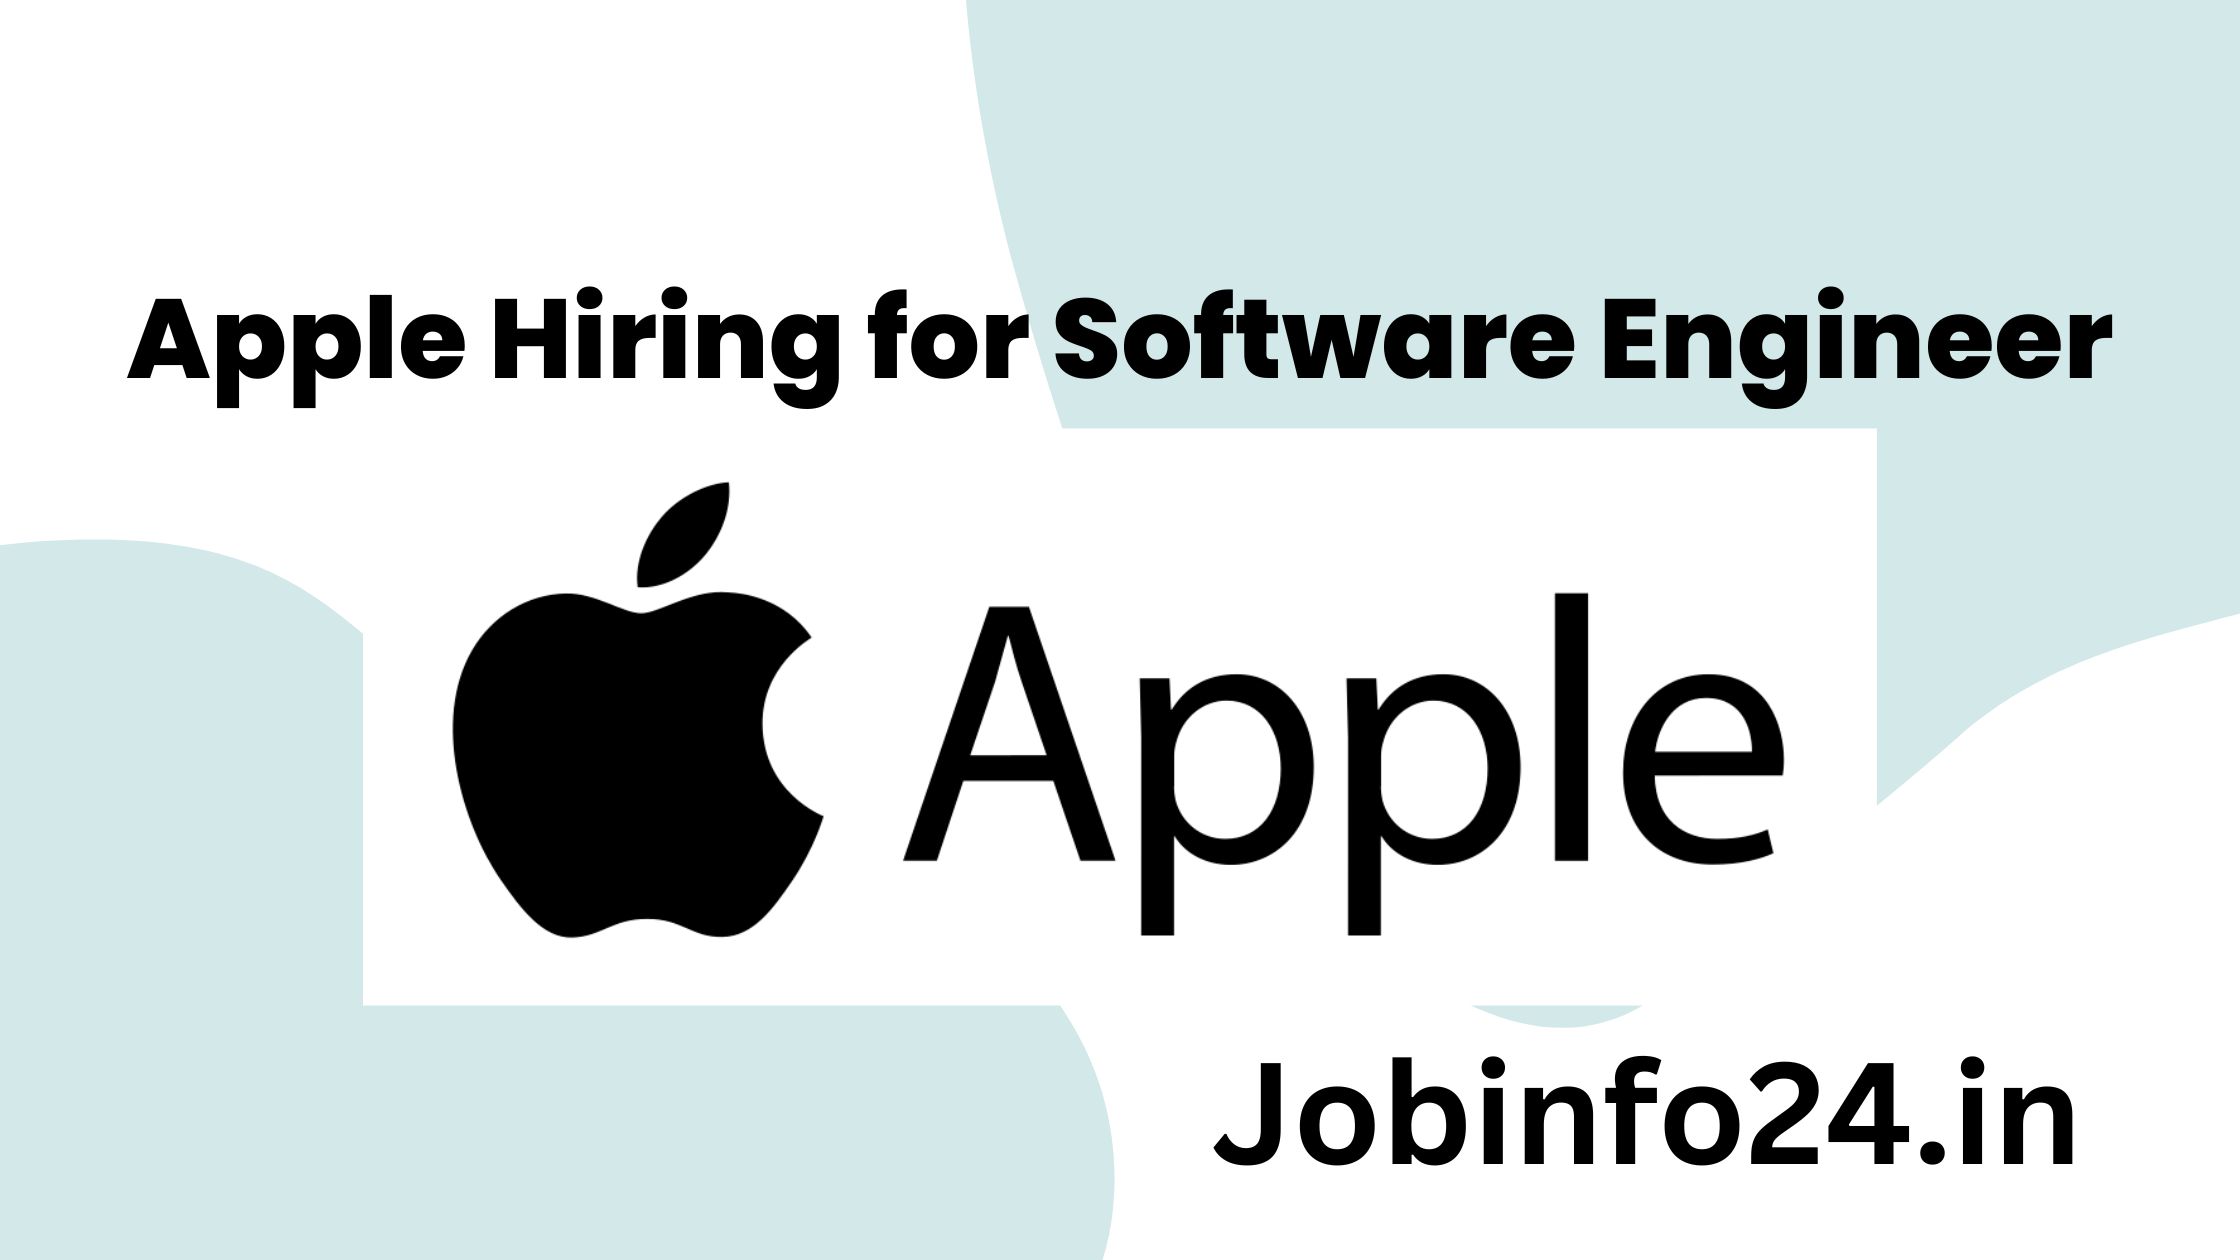 Apple Hiring for Software Engineer